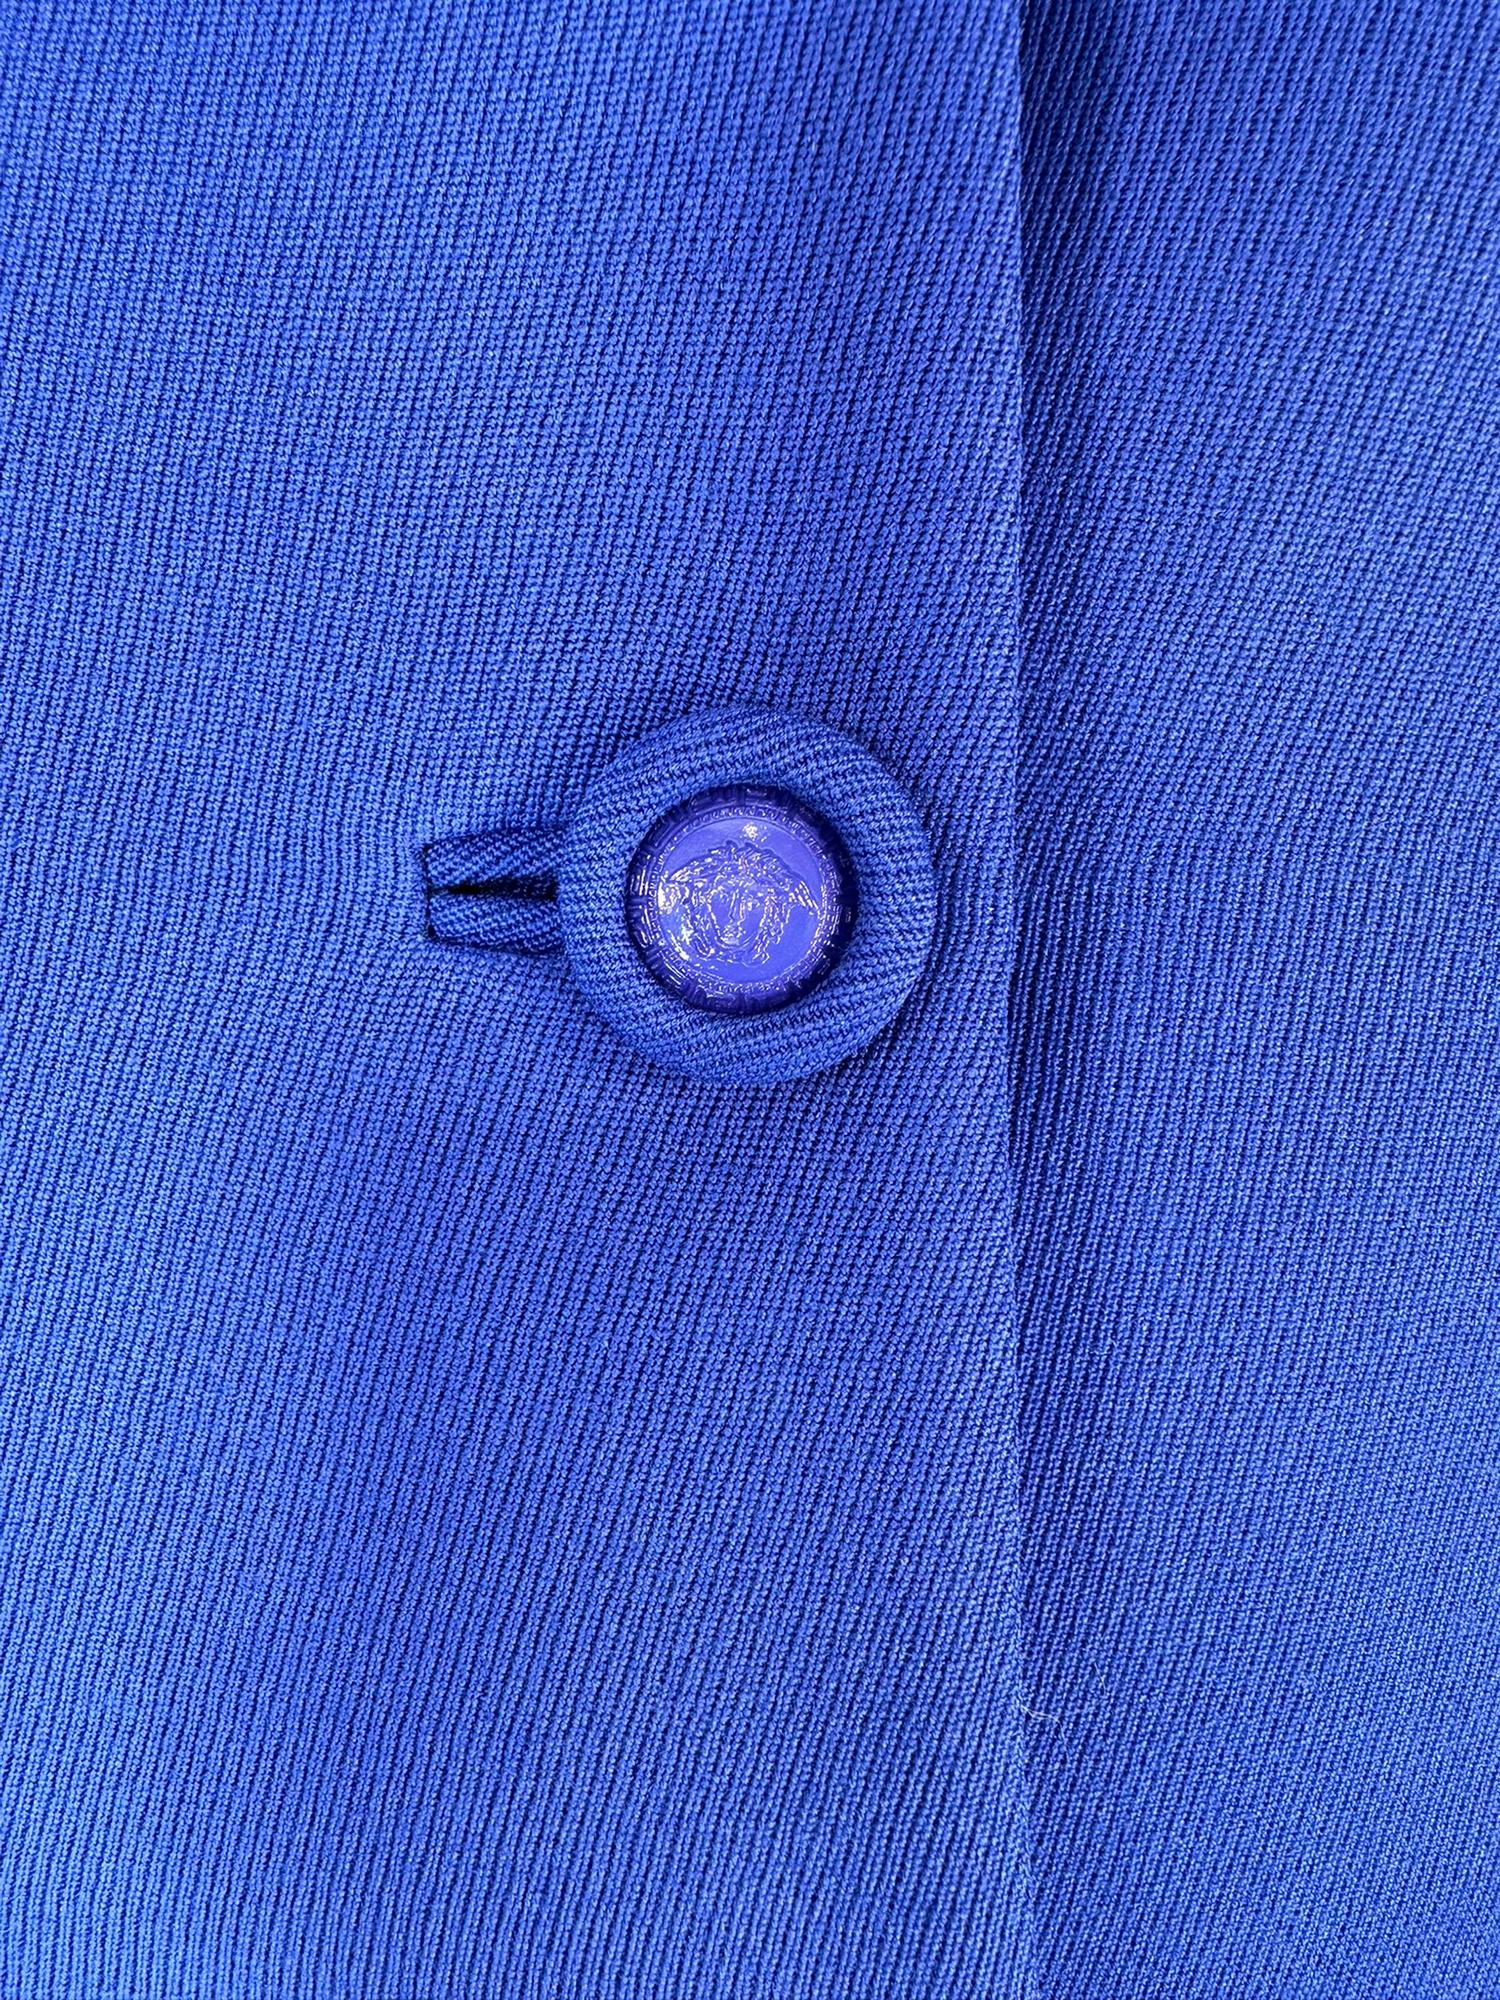 Gianni Versace Couture F/W 1995 Royal Blue Wool Pant Suit  For Sale 9